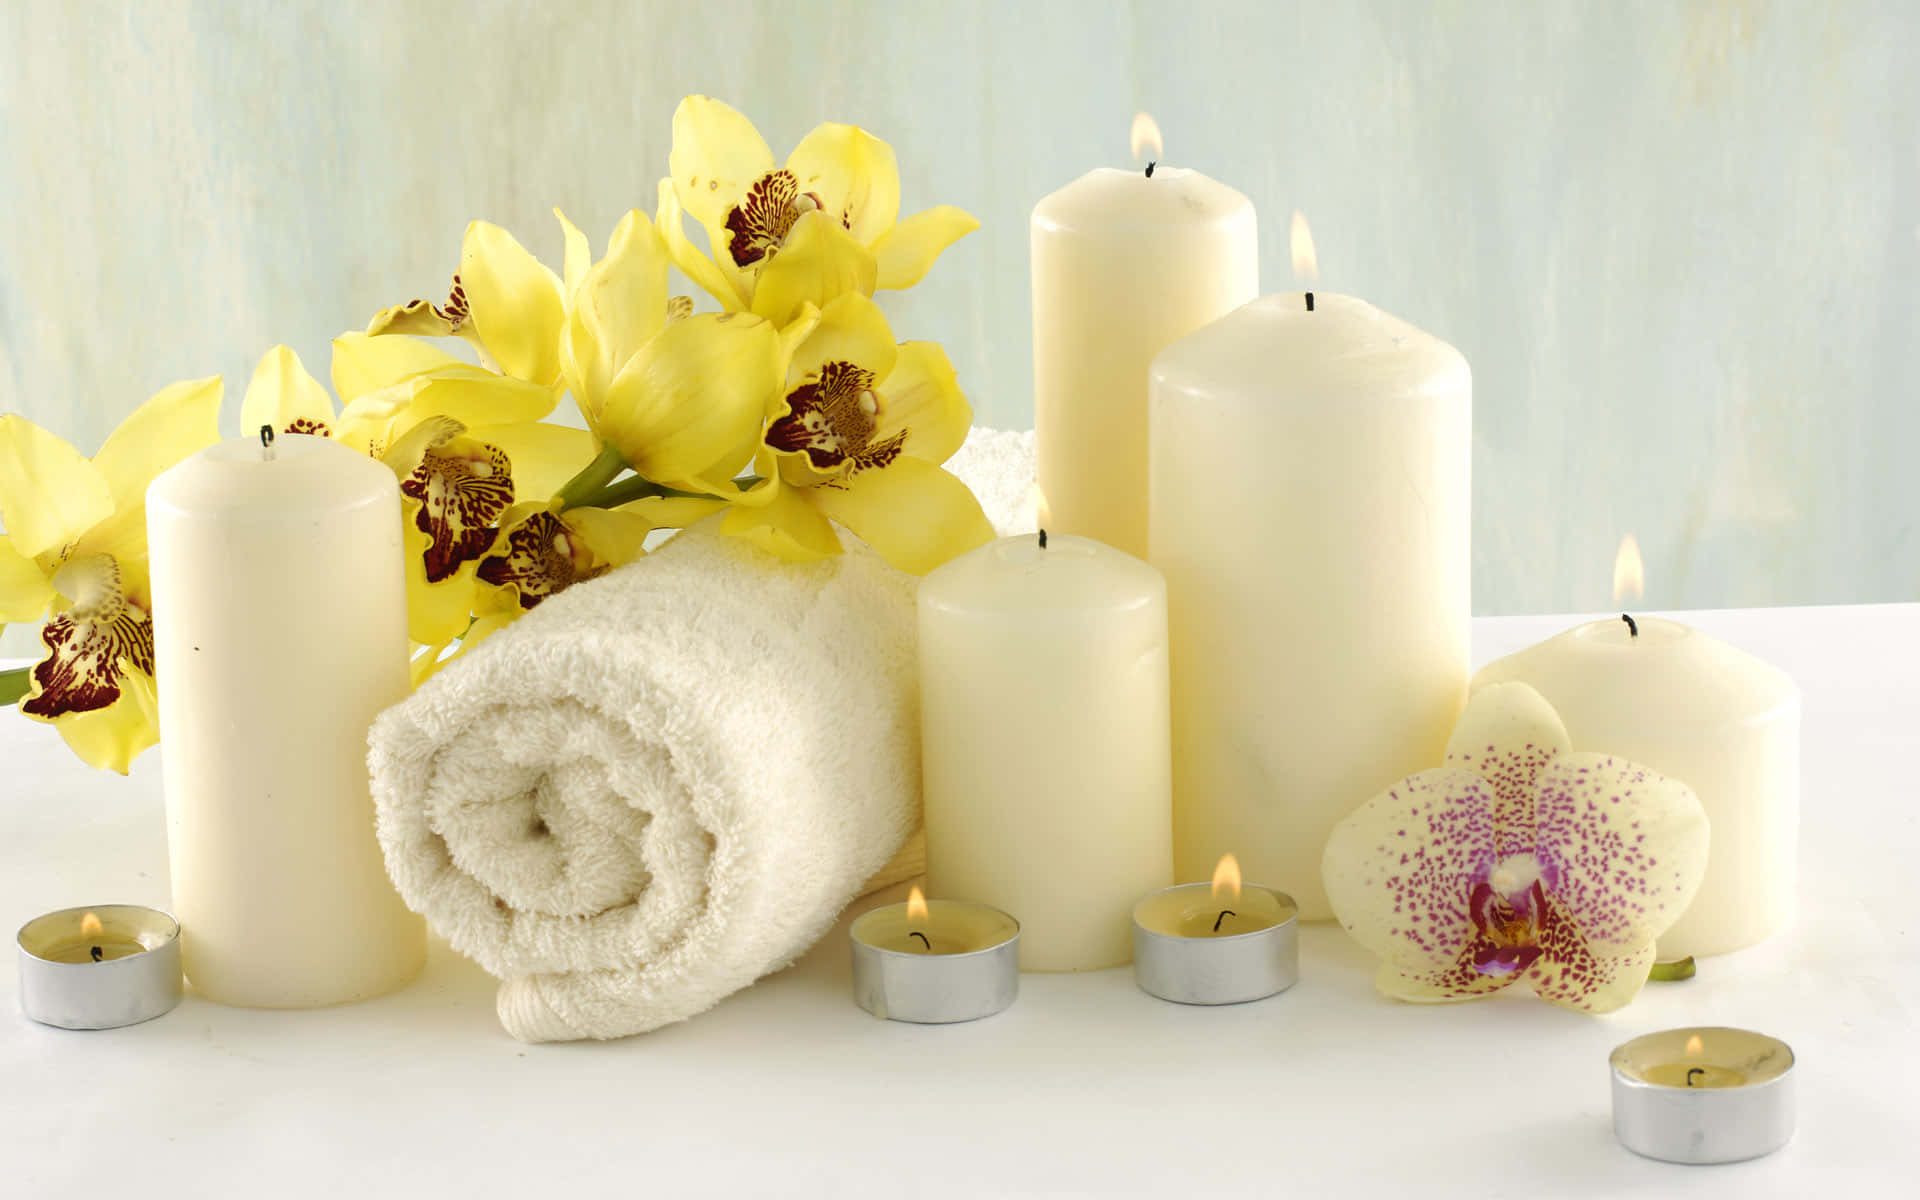 “Relax and Enjoy a Luxurious Spa Treatment.” Wallpaper